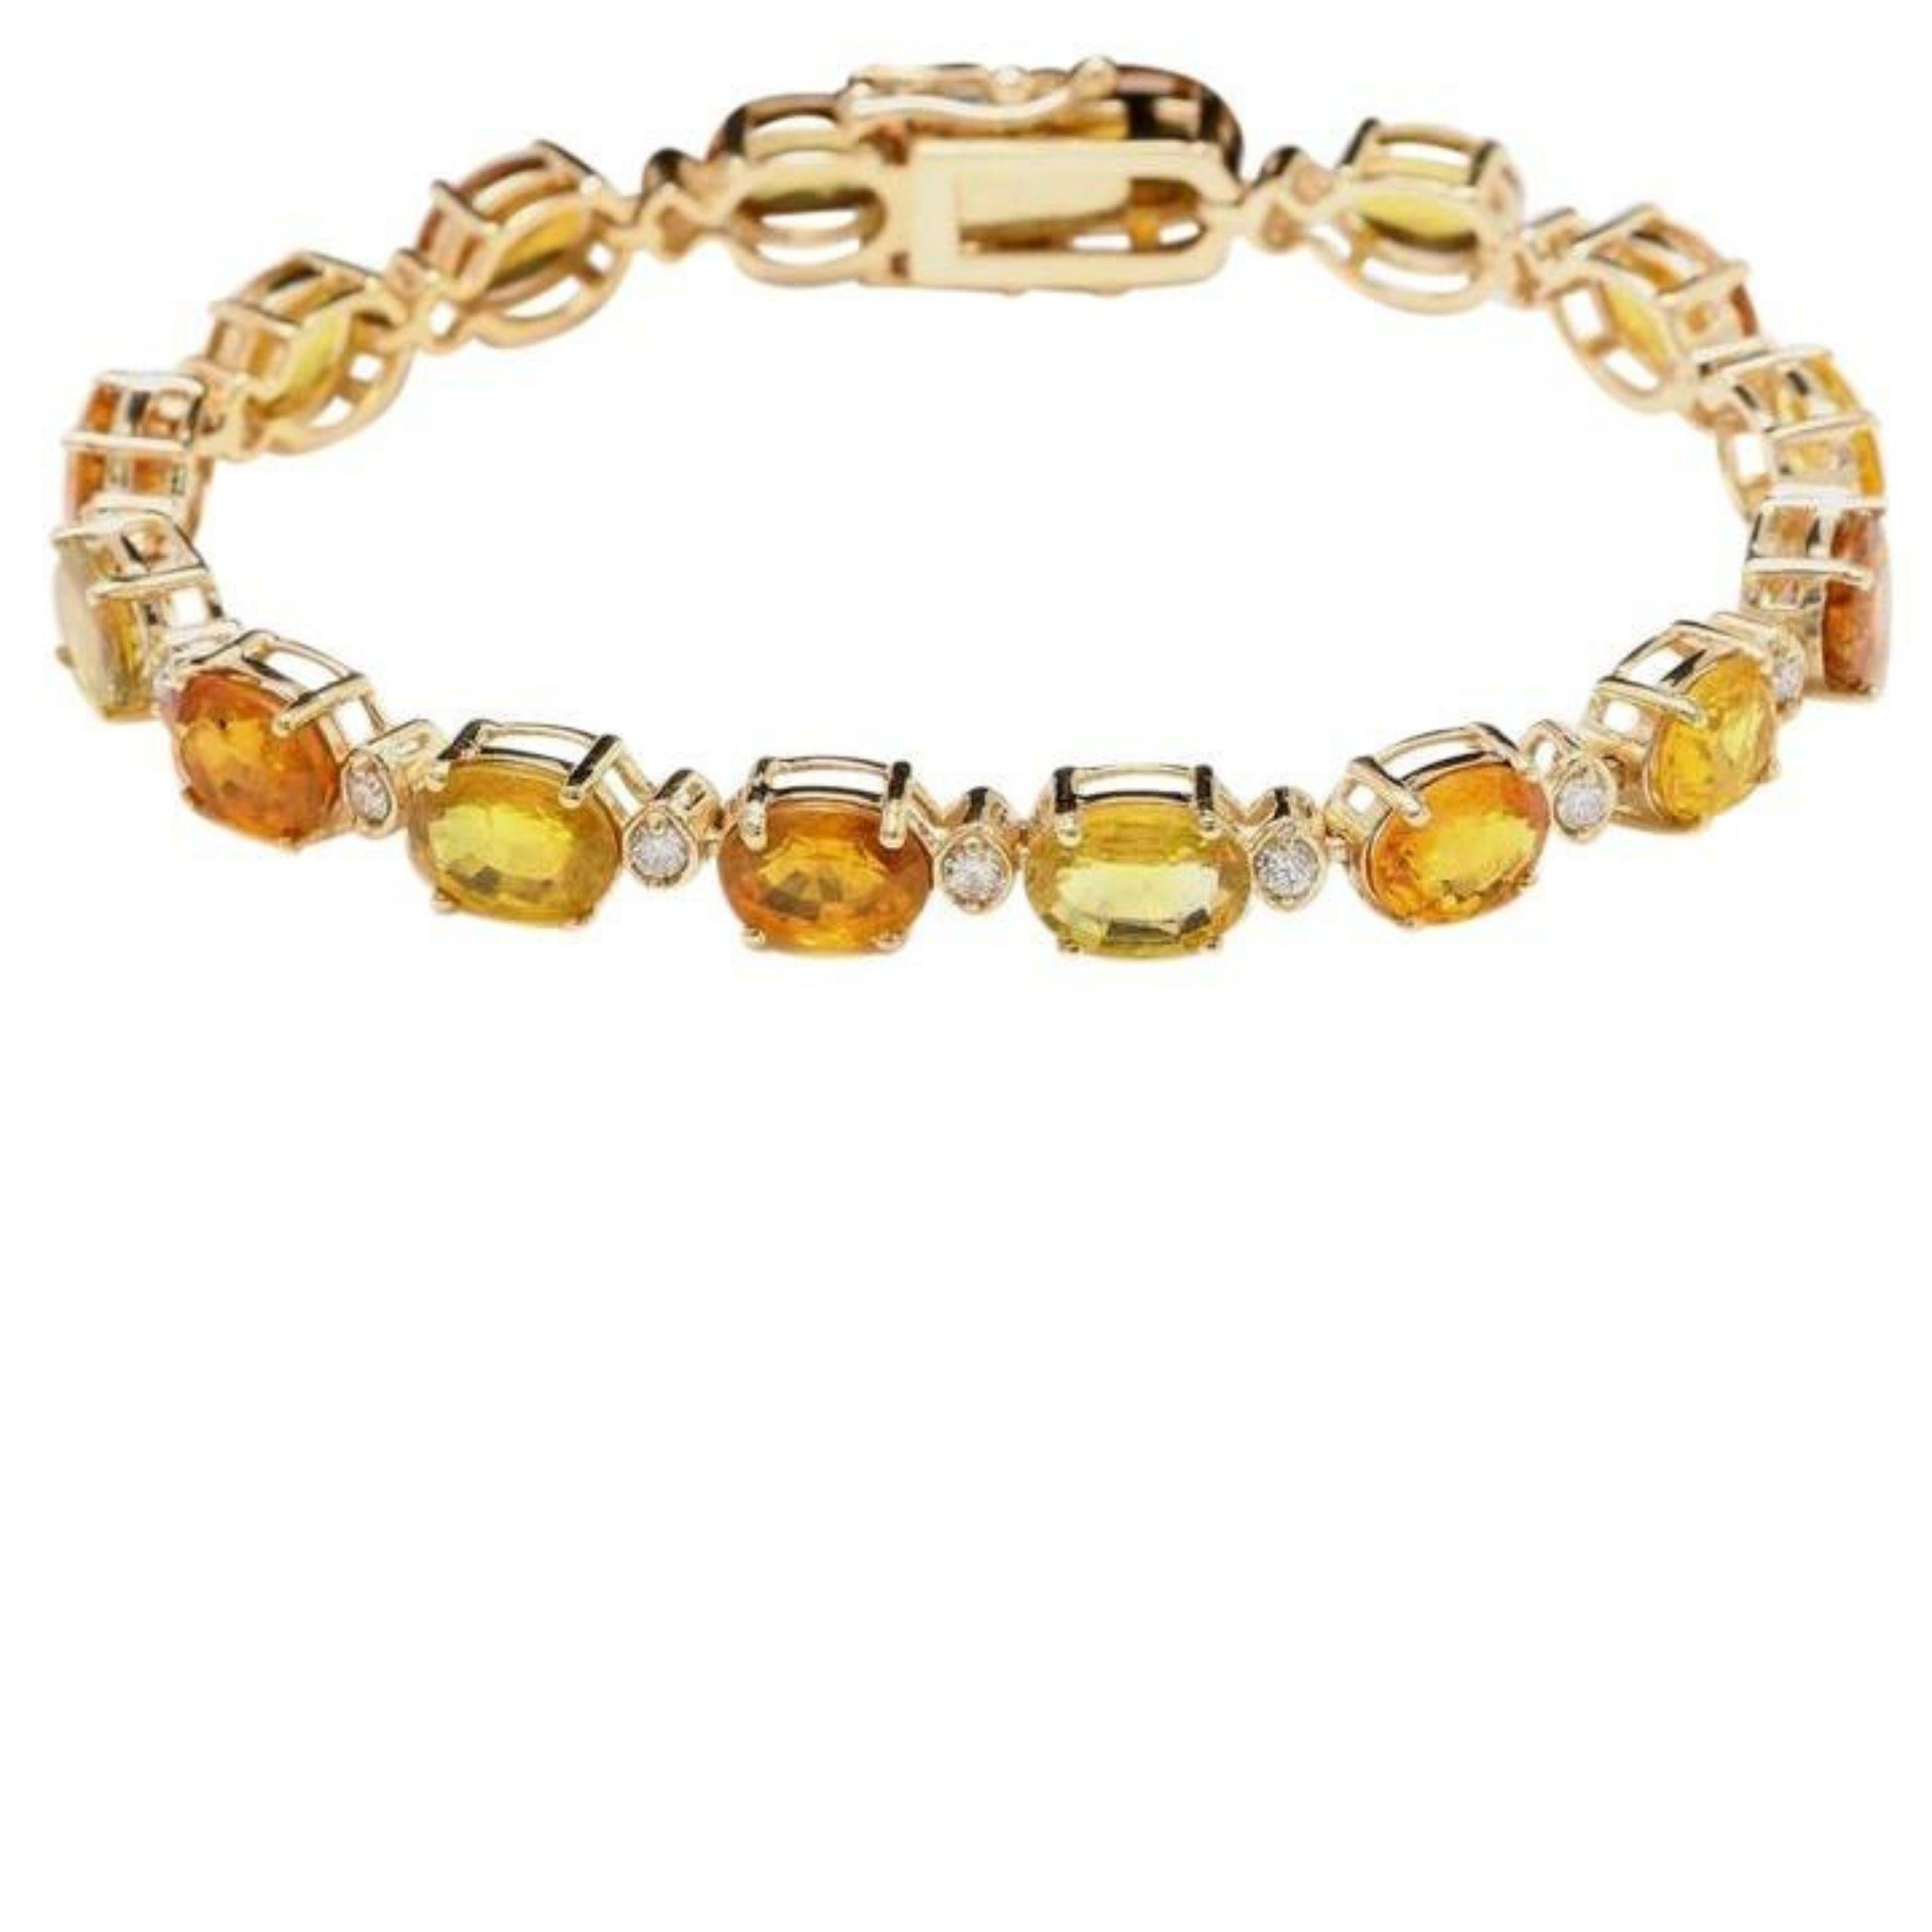 VeryImpressive 30.65Ct Natural Sapphire & Diamond 14K Solid Yellow Gold Bracelet For Sale 2